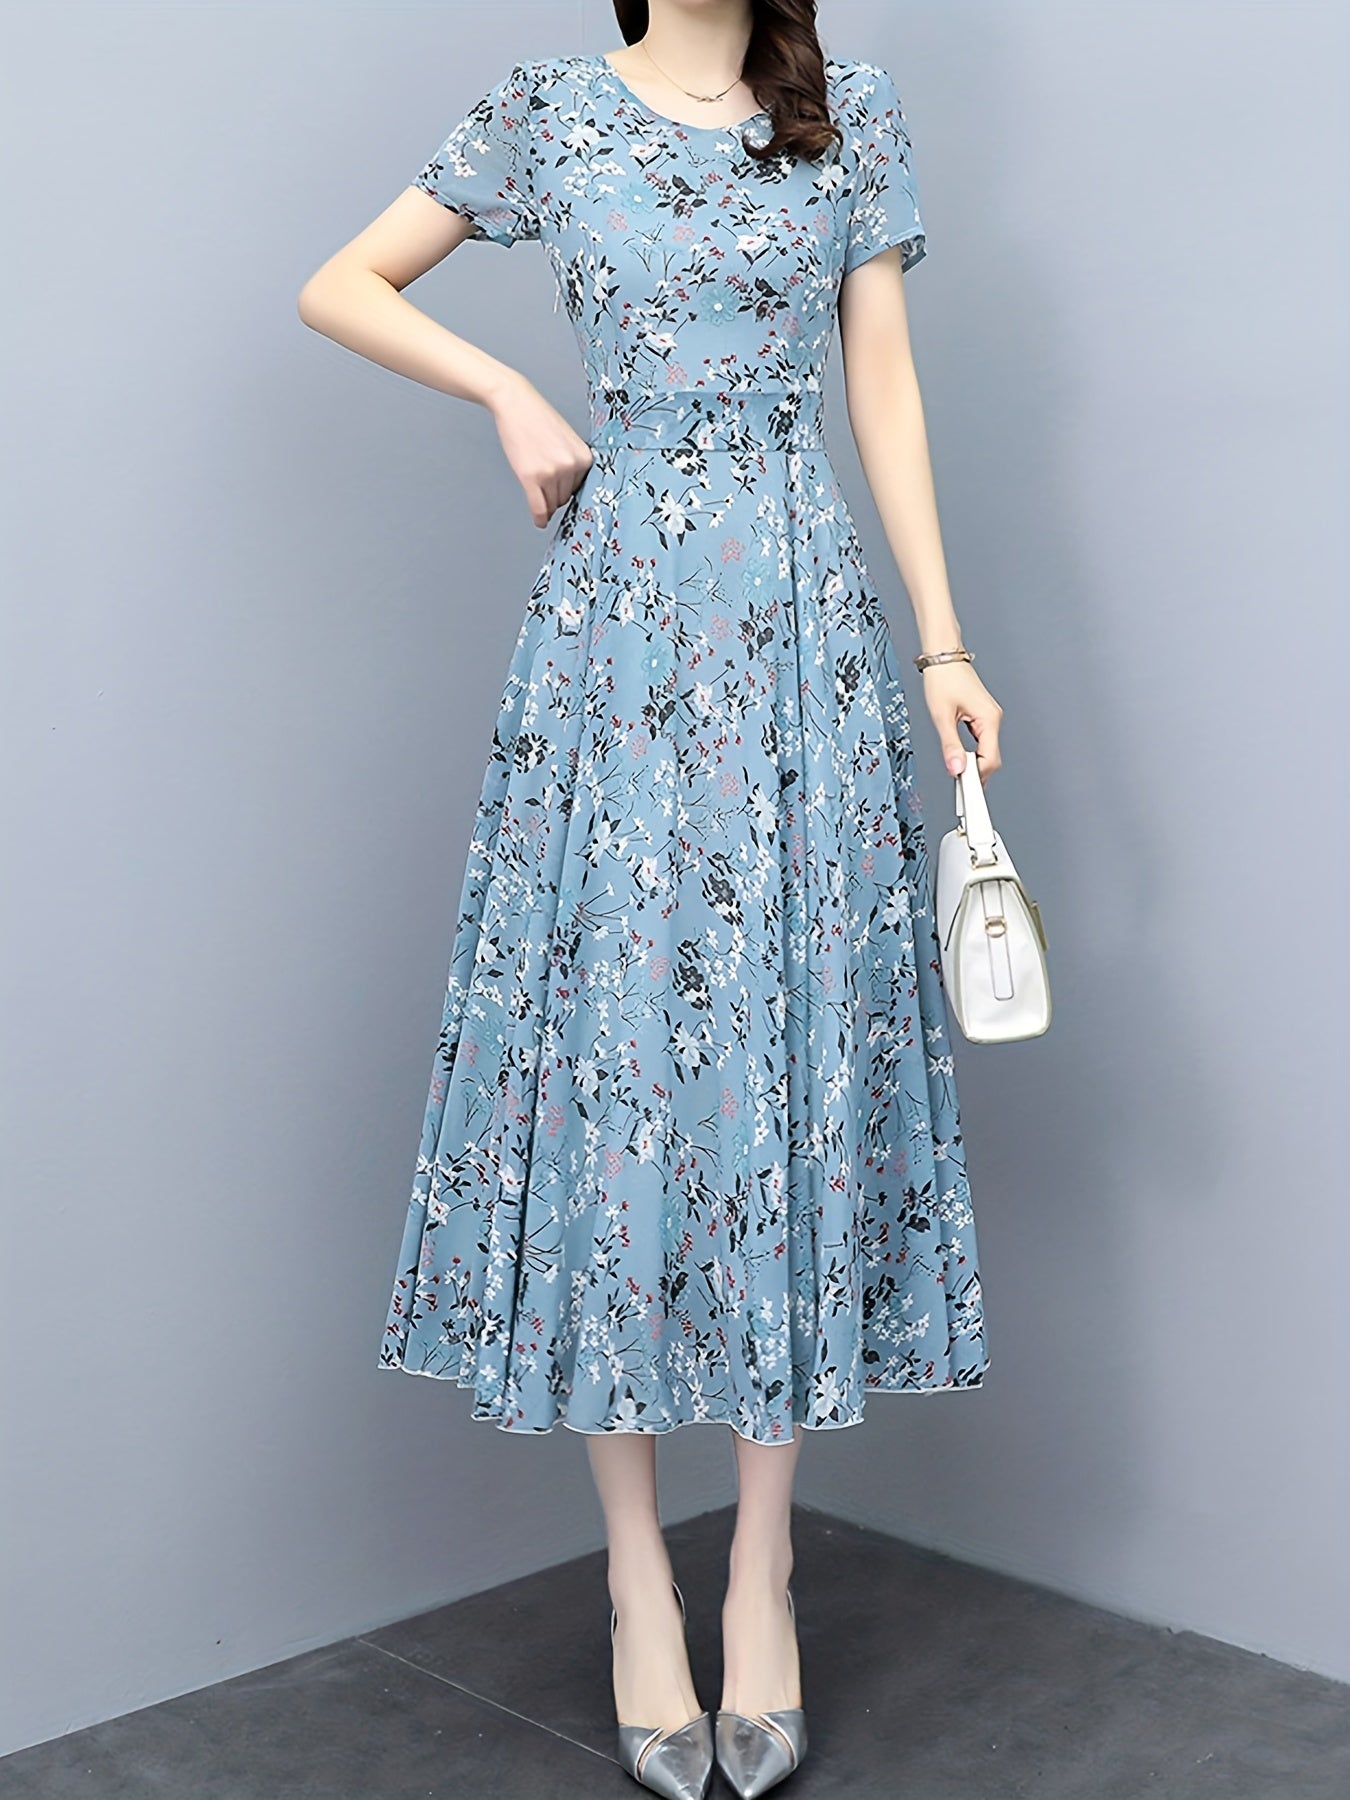 Bohemian Floral Print MIdi Dress, Elegant Short Sleeve Dress For Spring and Summer, Cocktail Party Dress